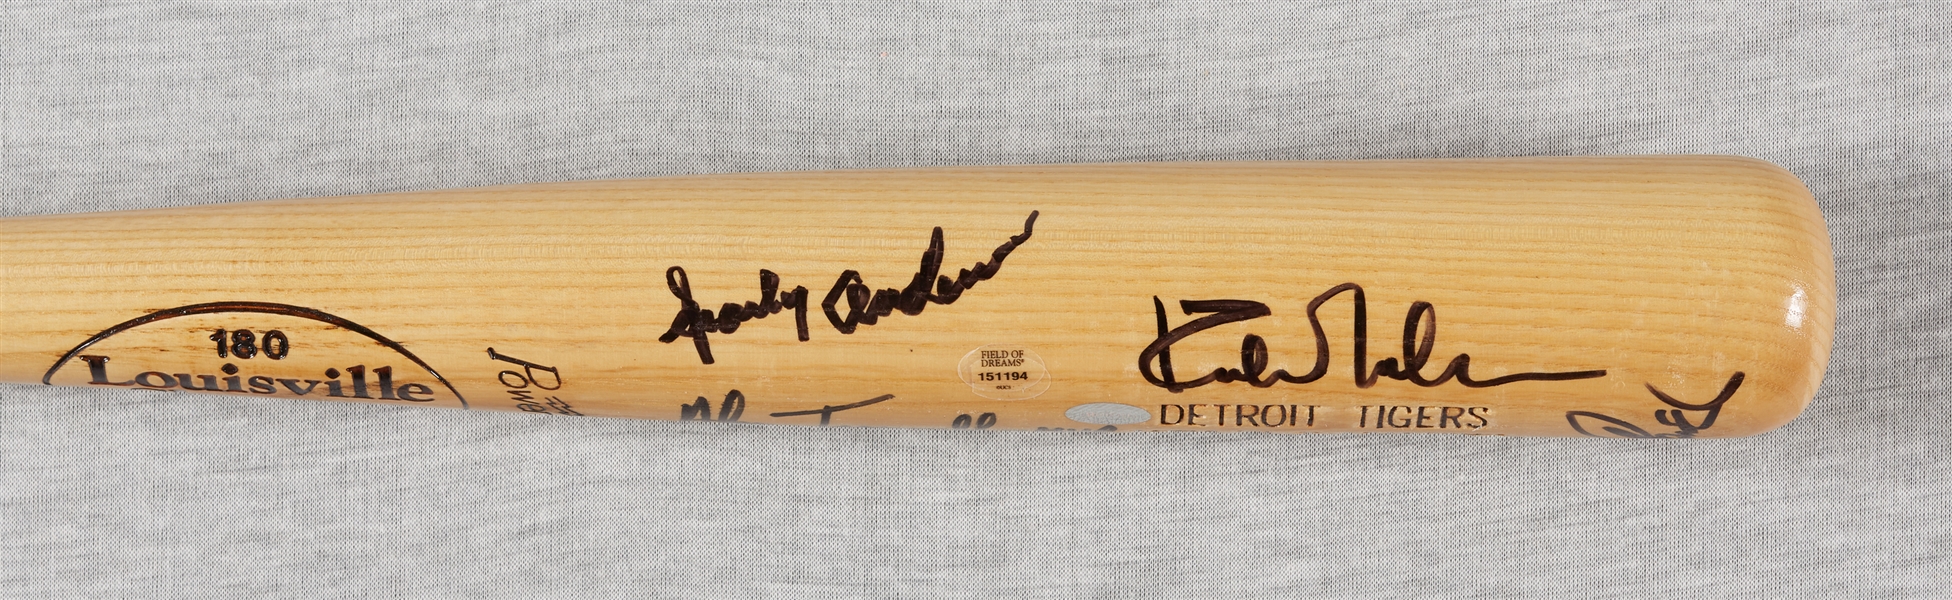 1984 Detroit Tigers World Champs Team-Signed Bat (7) (Mounted Memories)